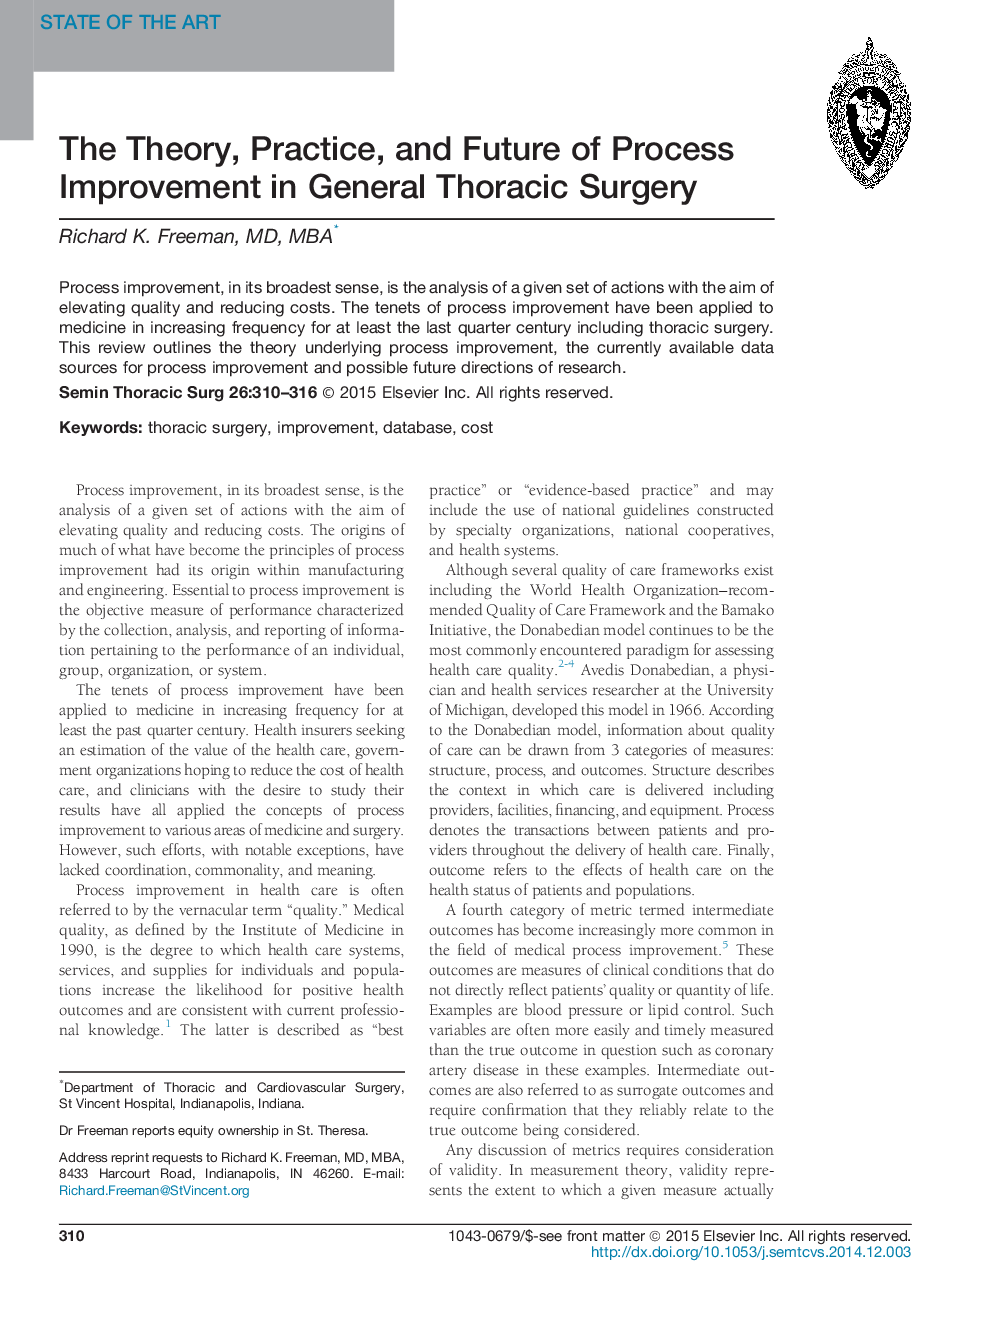 The Theory, Practice, and Future of Process Improvement in General Thoracic Surgery 